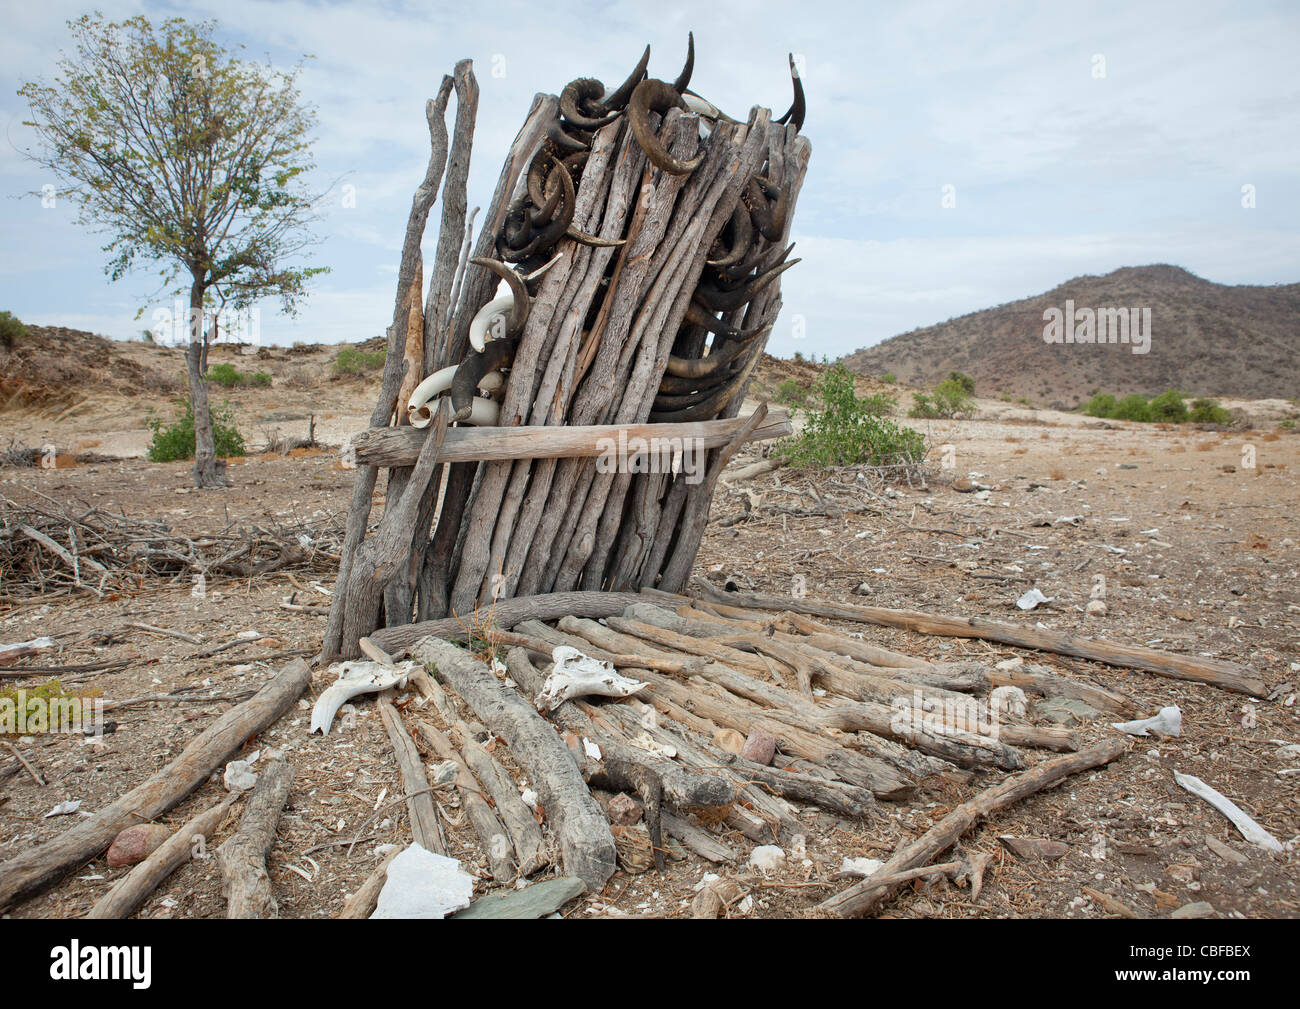 Page 2 - Mucubal Tribe High Resolution Stock Photography and Images - Alamy